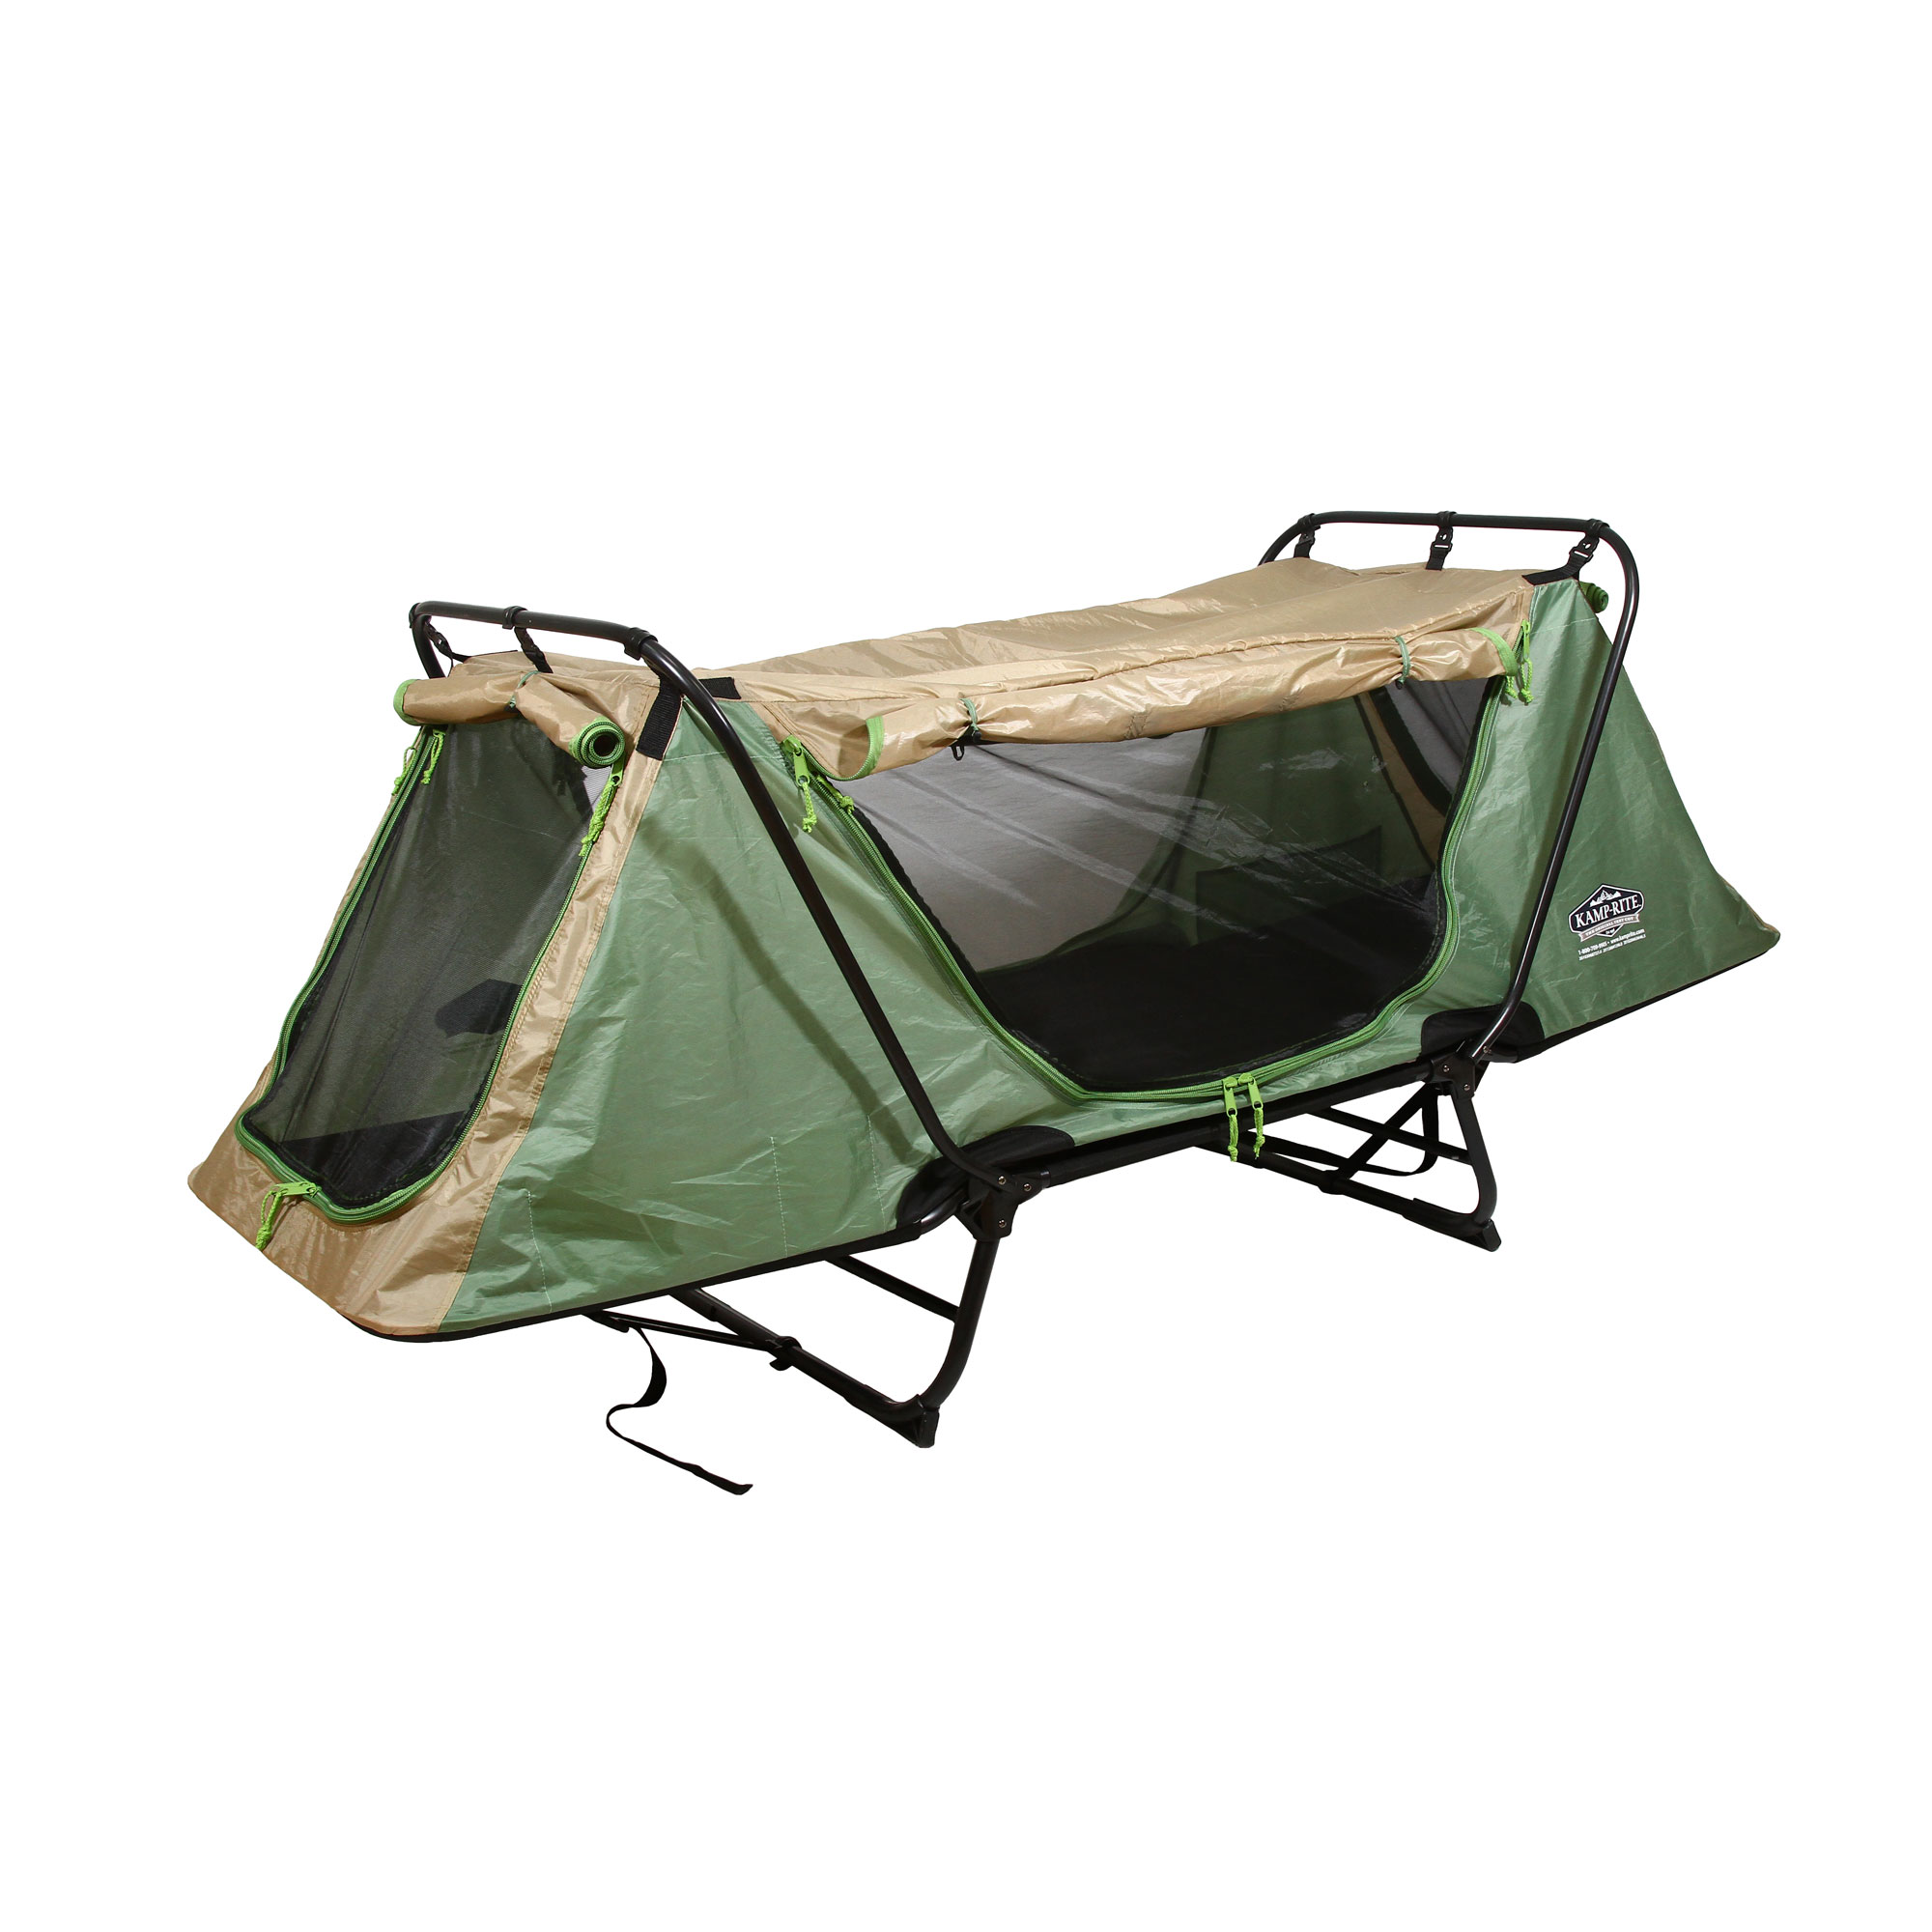 Kamp-Rite Original Tent Cot Folding Camping and Hiking Bed 1 Person (Open Box) - image 1 of 9